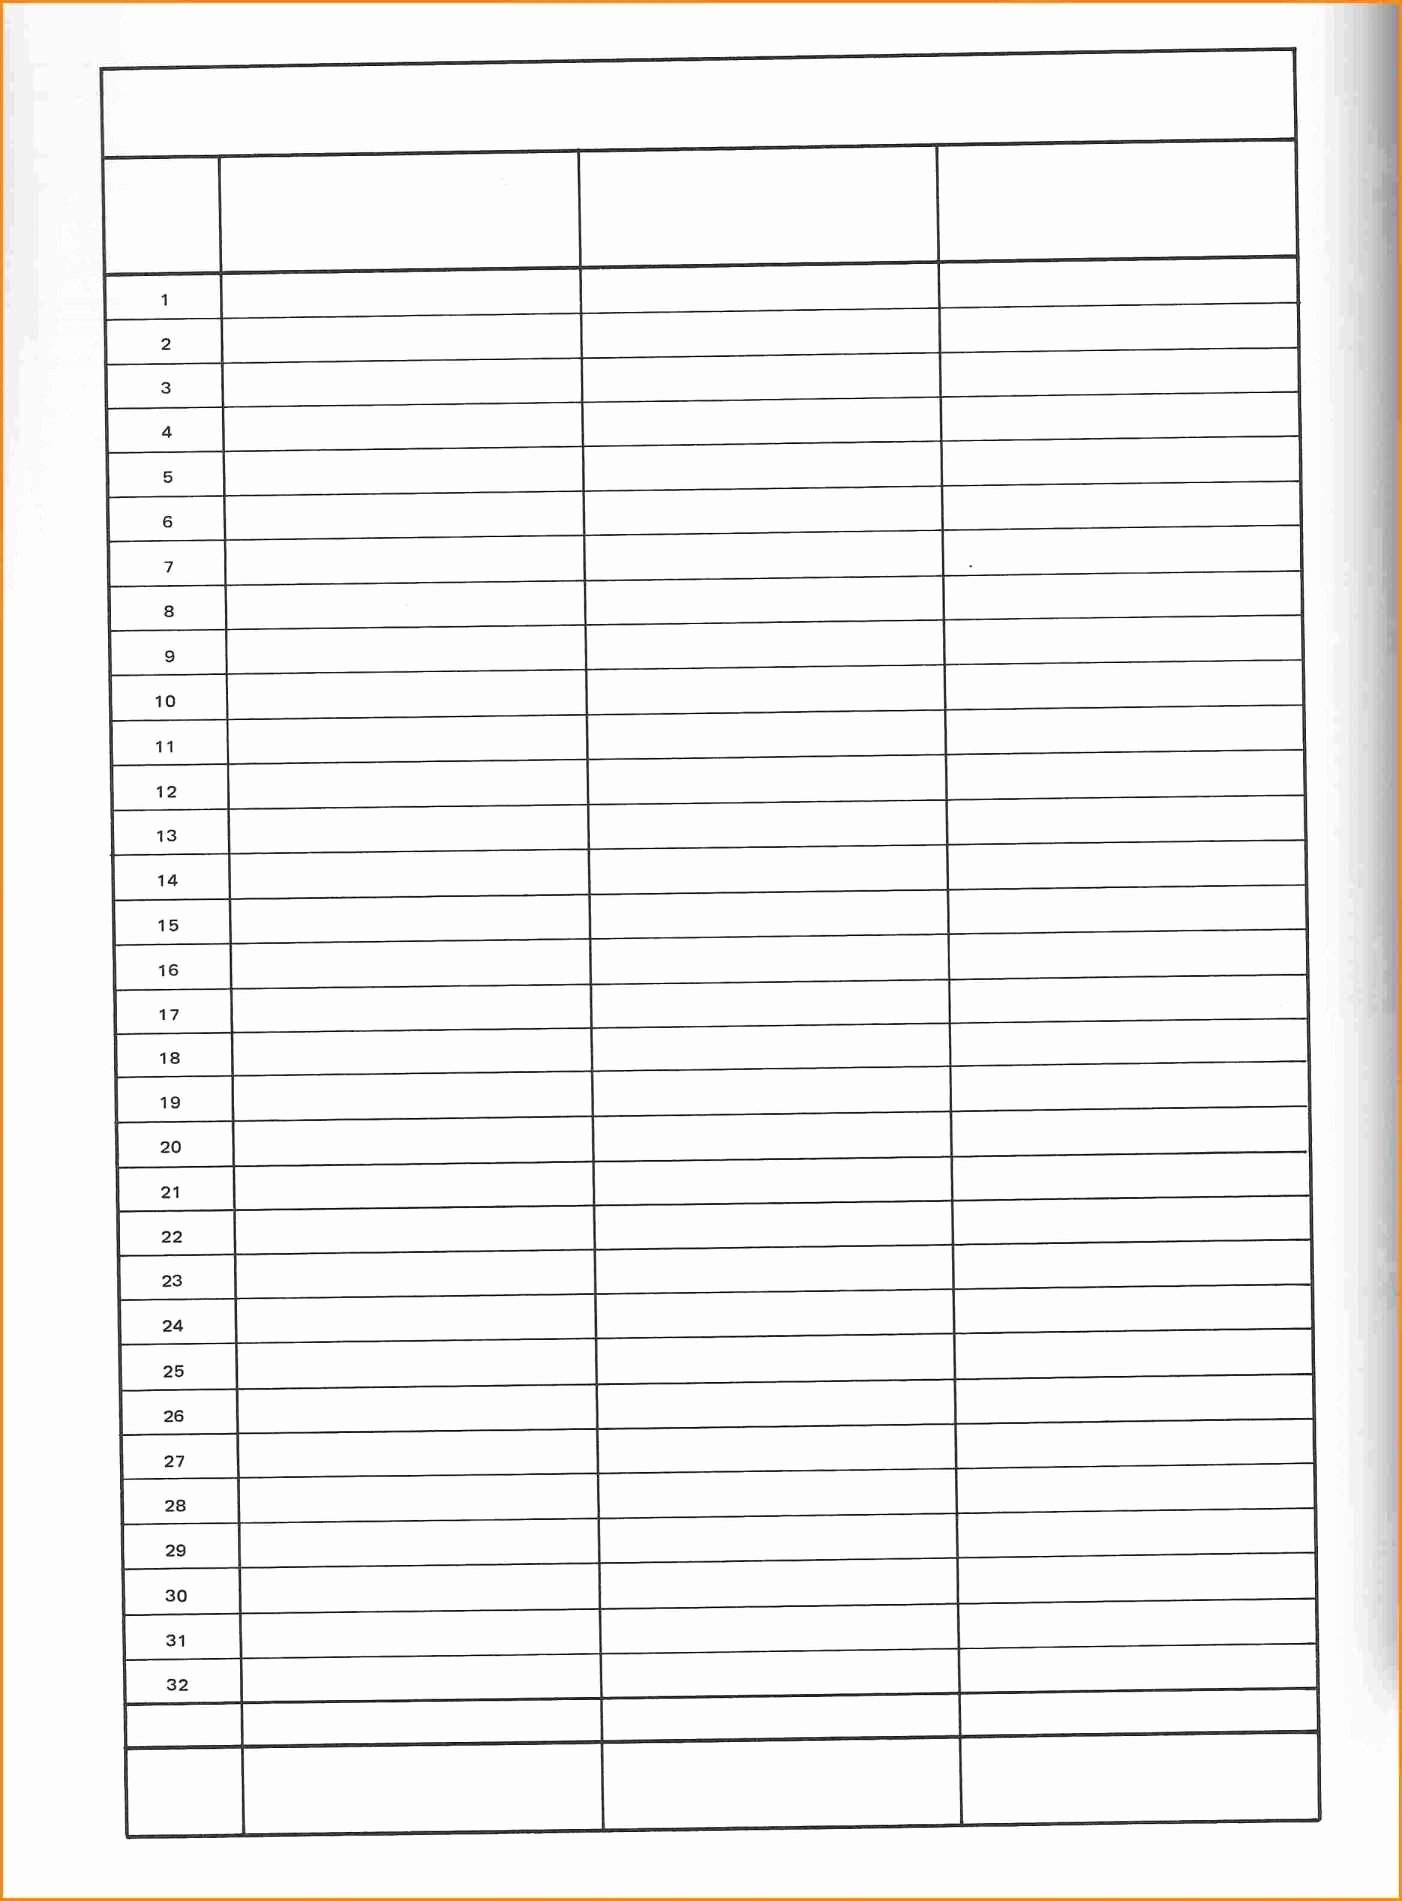 Free Printable Spreadsheet Template Unique Blank Spreadsheet with Gridlines Inspirational Spreadsheet